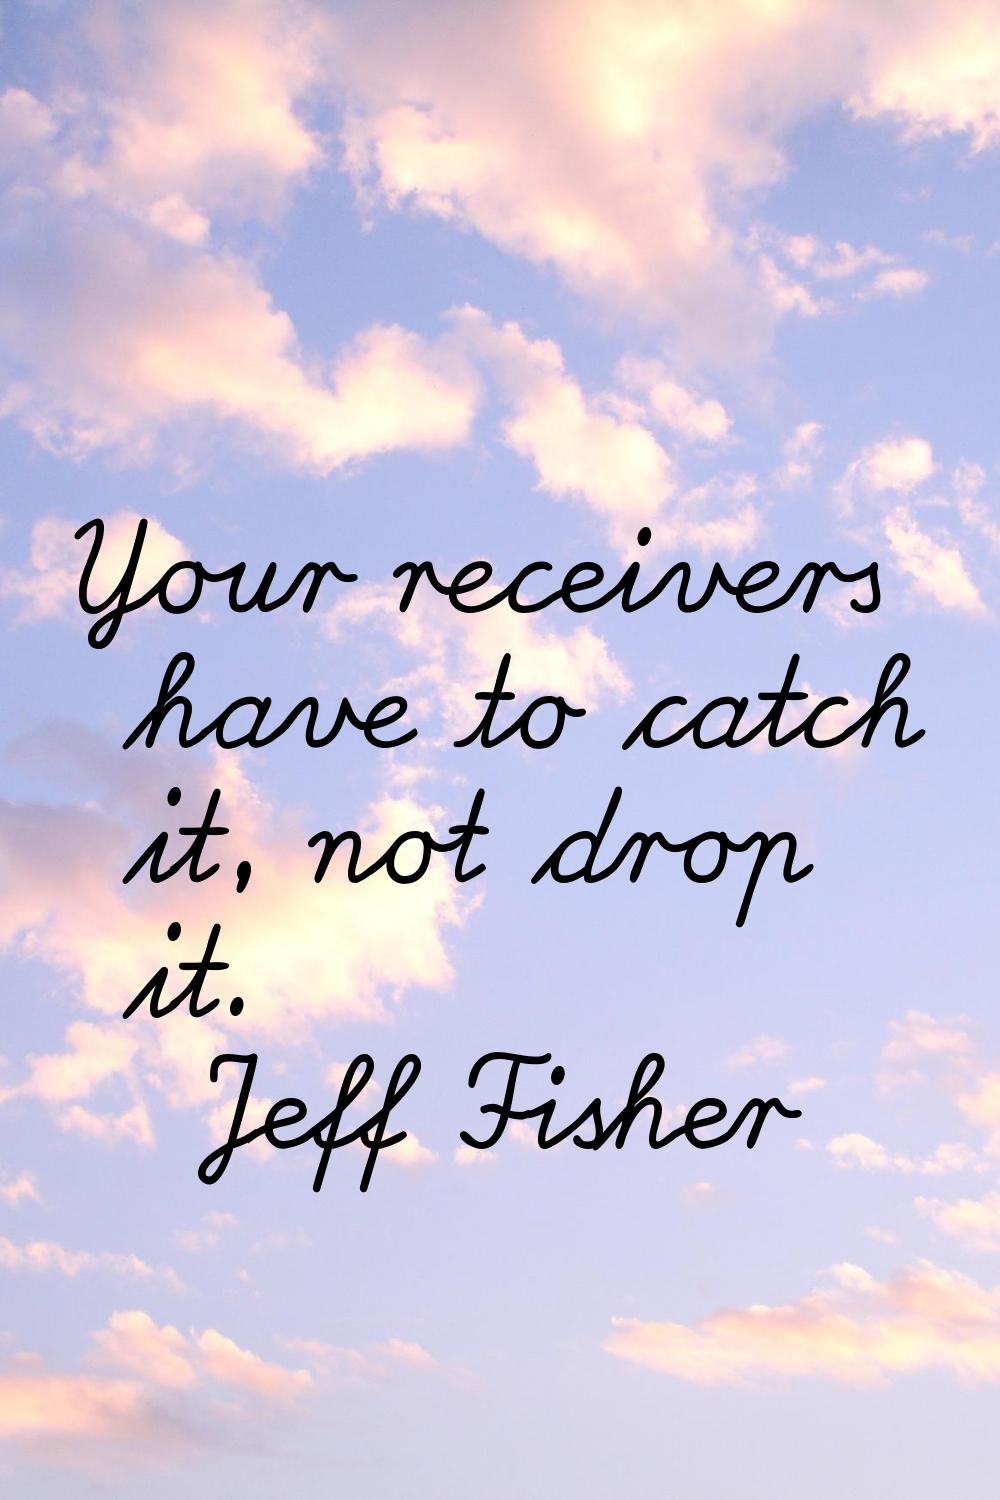 Your receivers have to catch it, not drop it.